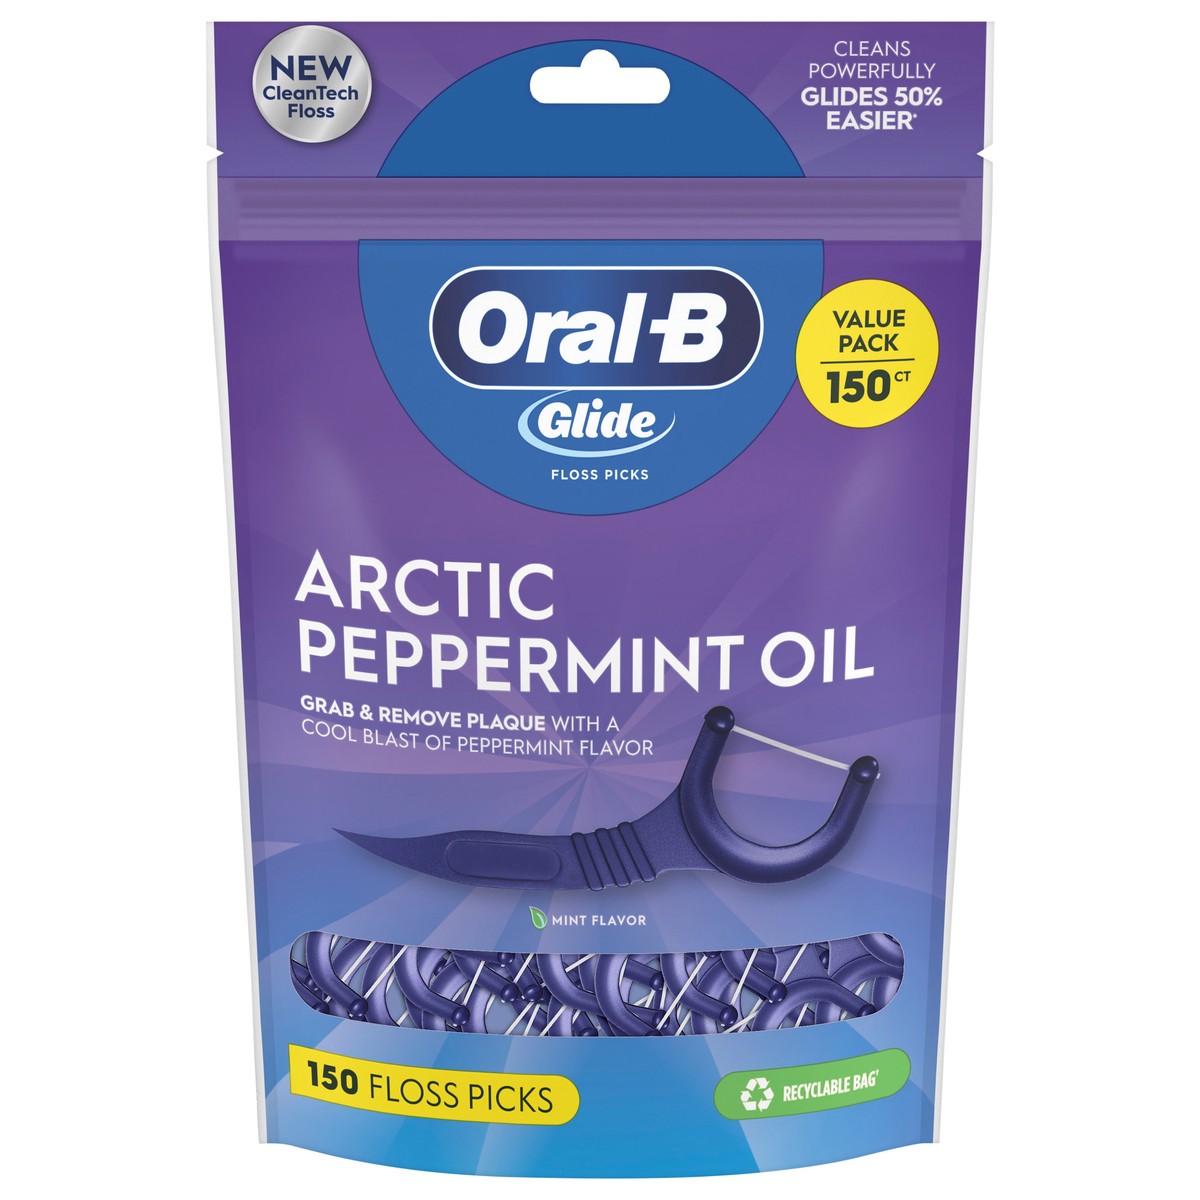 slide 1 of 4, Oral-B Glide Peppermint Dental Floss Picks with Arctic Peppermint Oil Flavor, 150 Picks, 150 ct